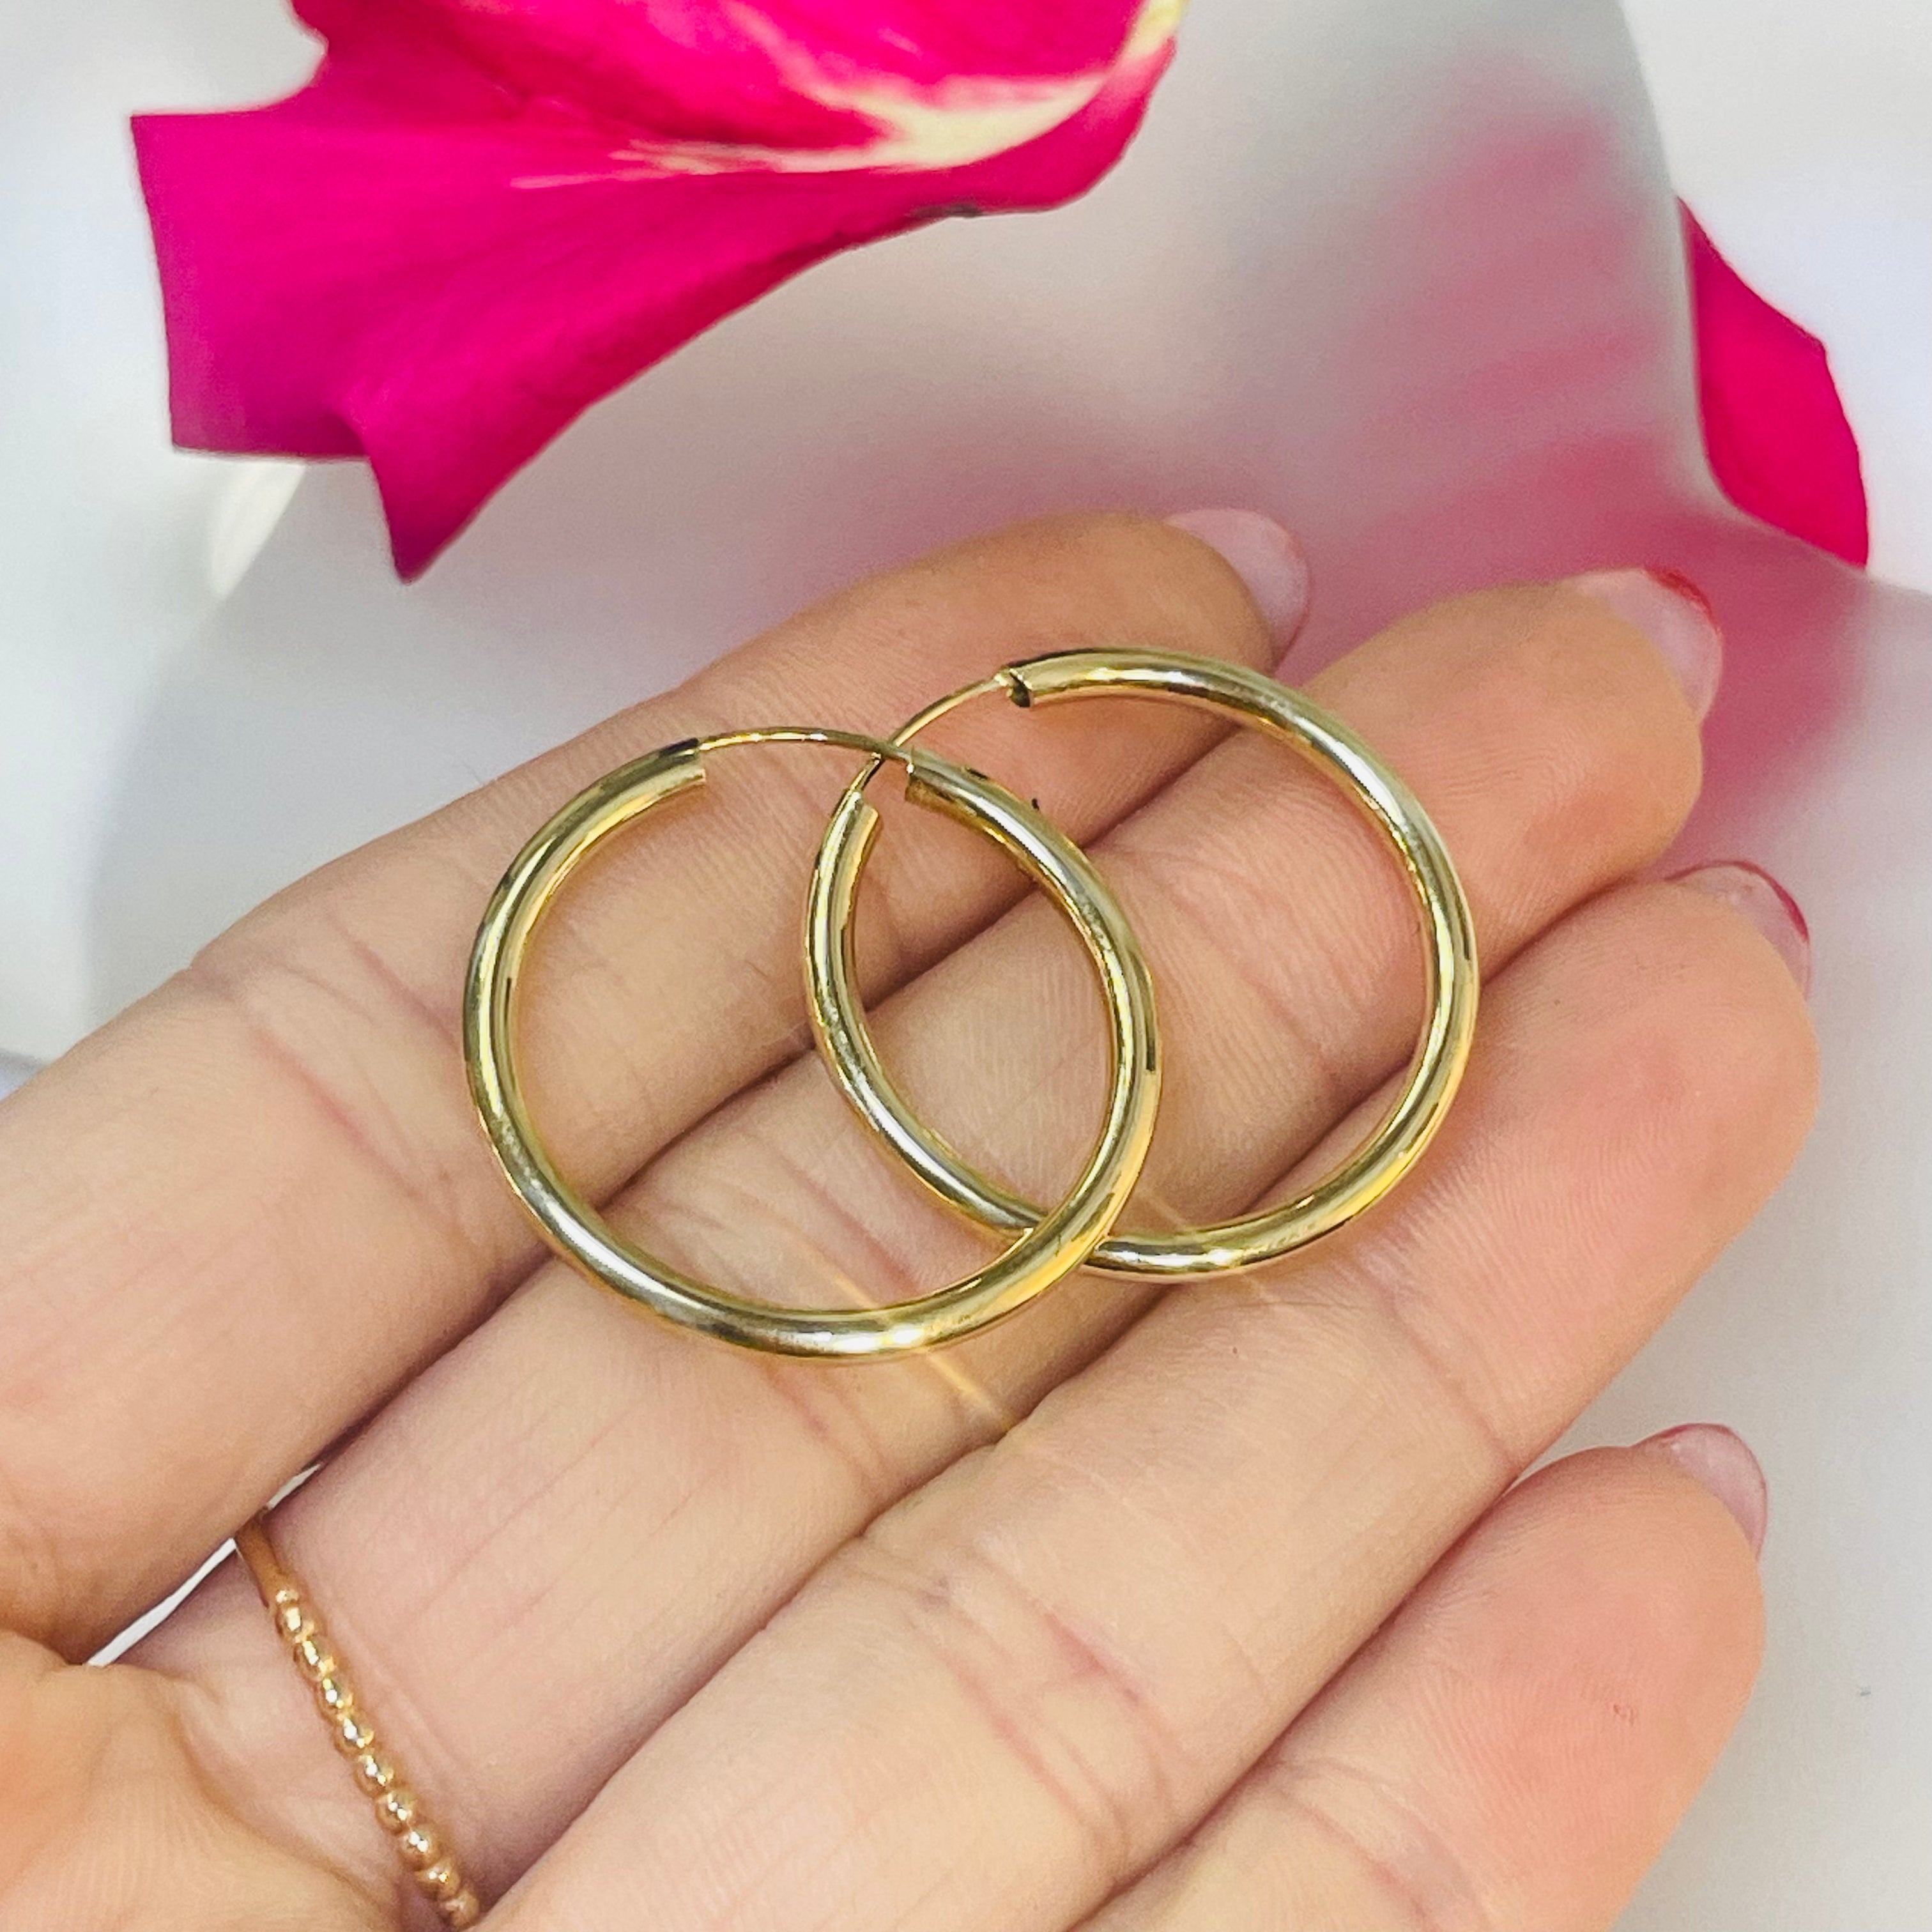 25mm 1” 2mm 14K Yellow Gold Endless Hoops